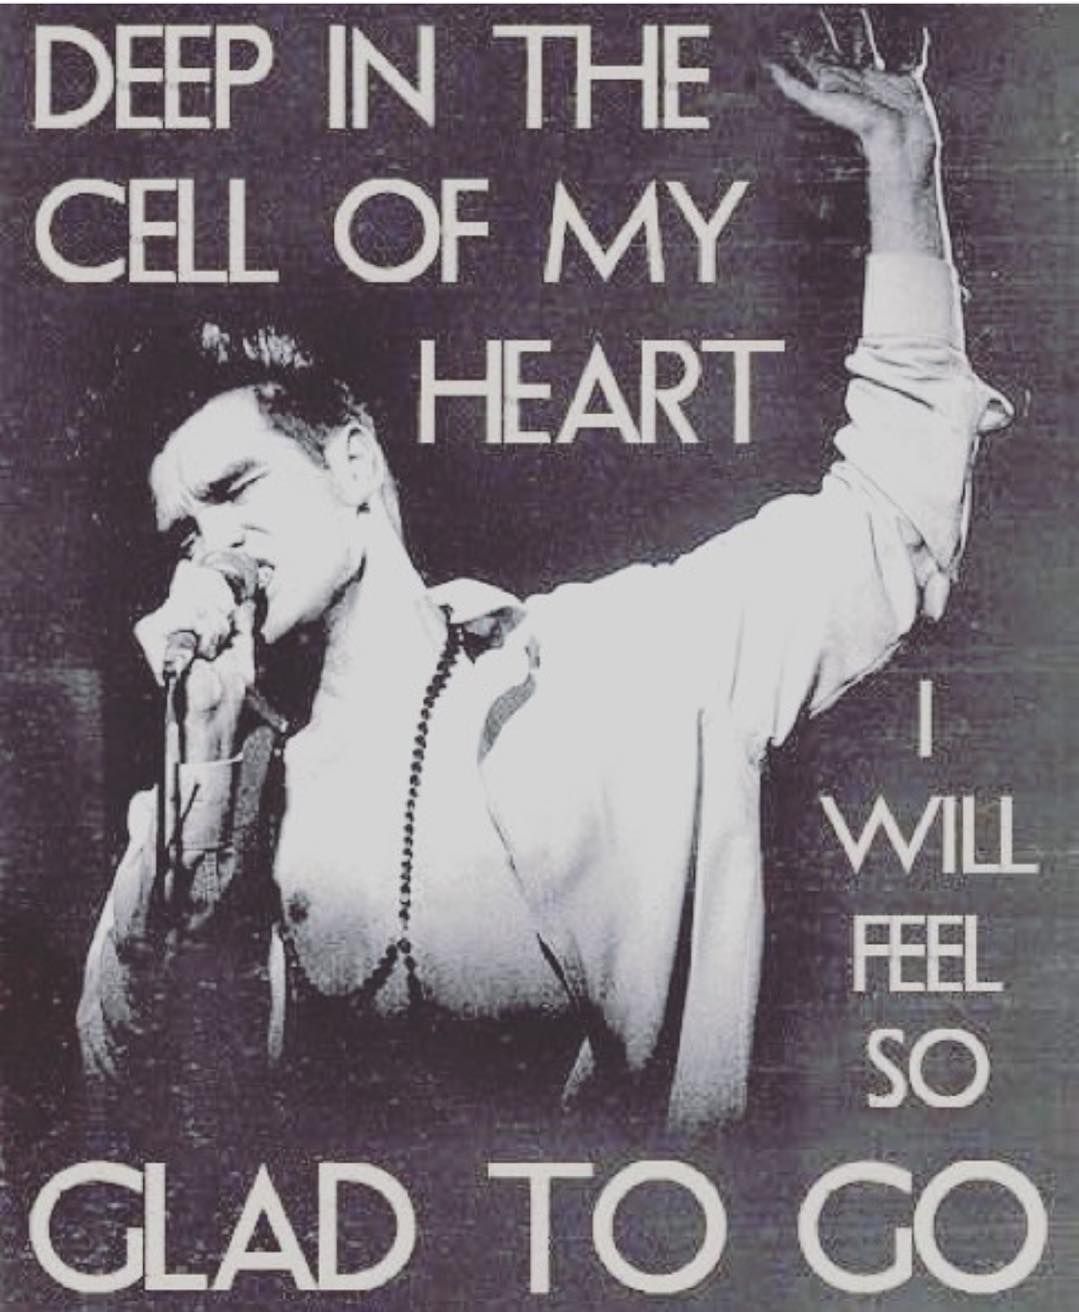 5 Morrissey Quotes About The Smiths